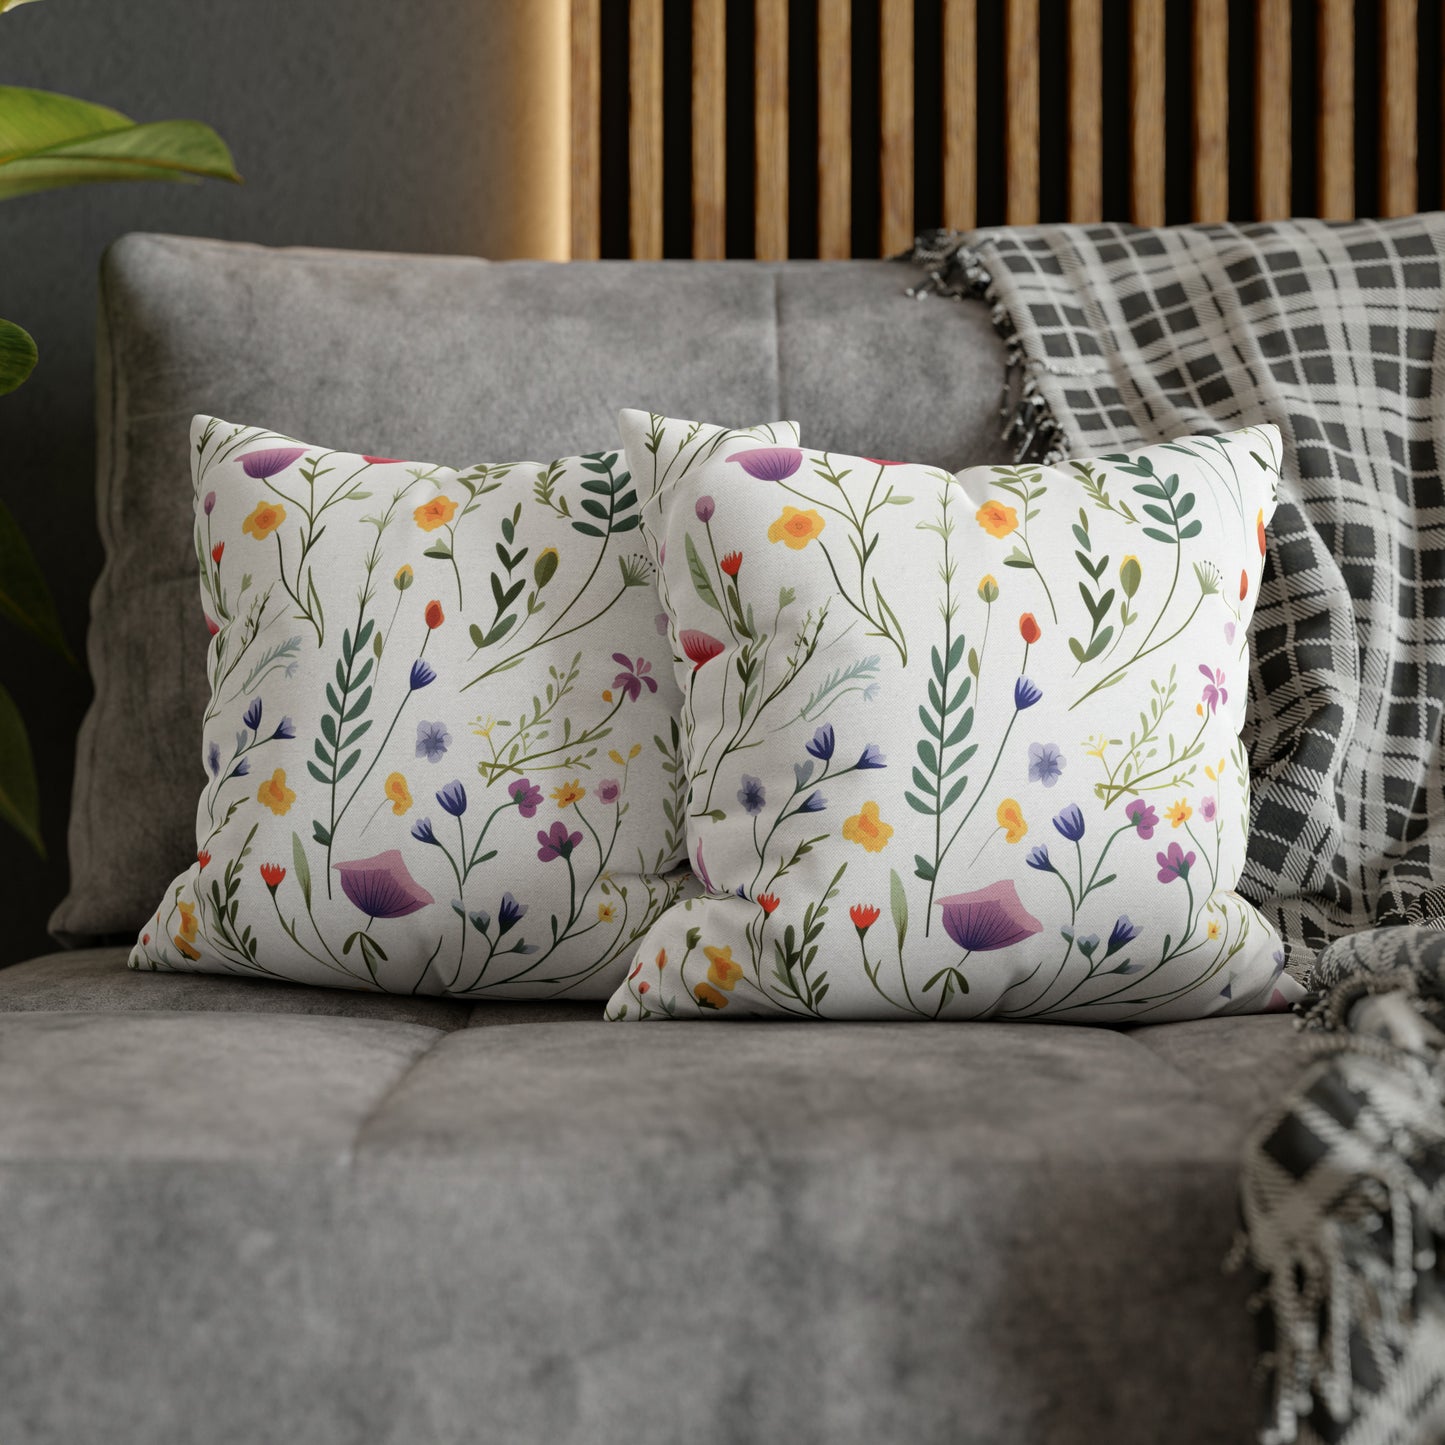 Dainty Wildflowers Square Pillow Case